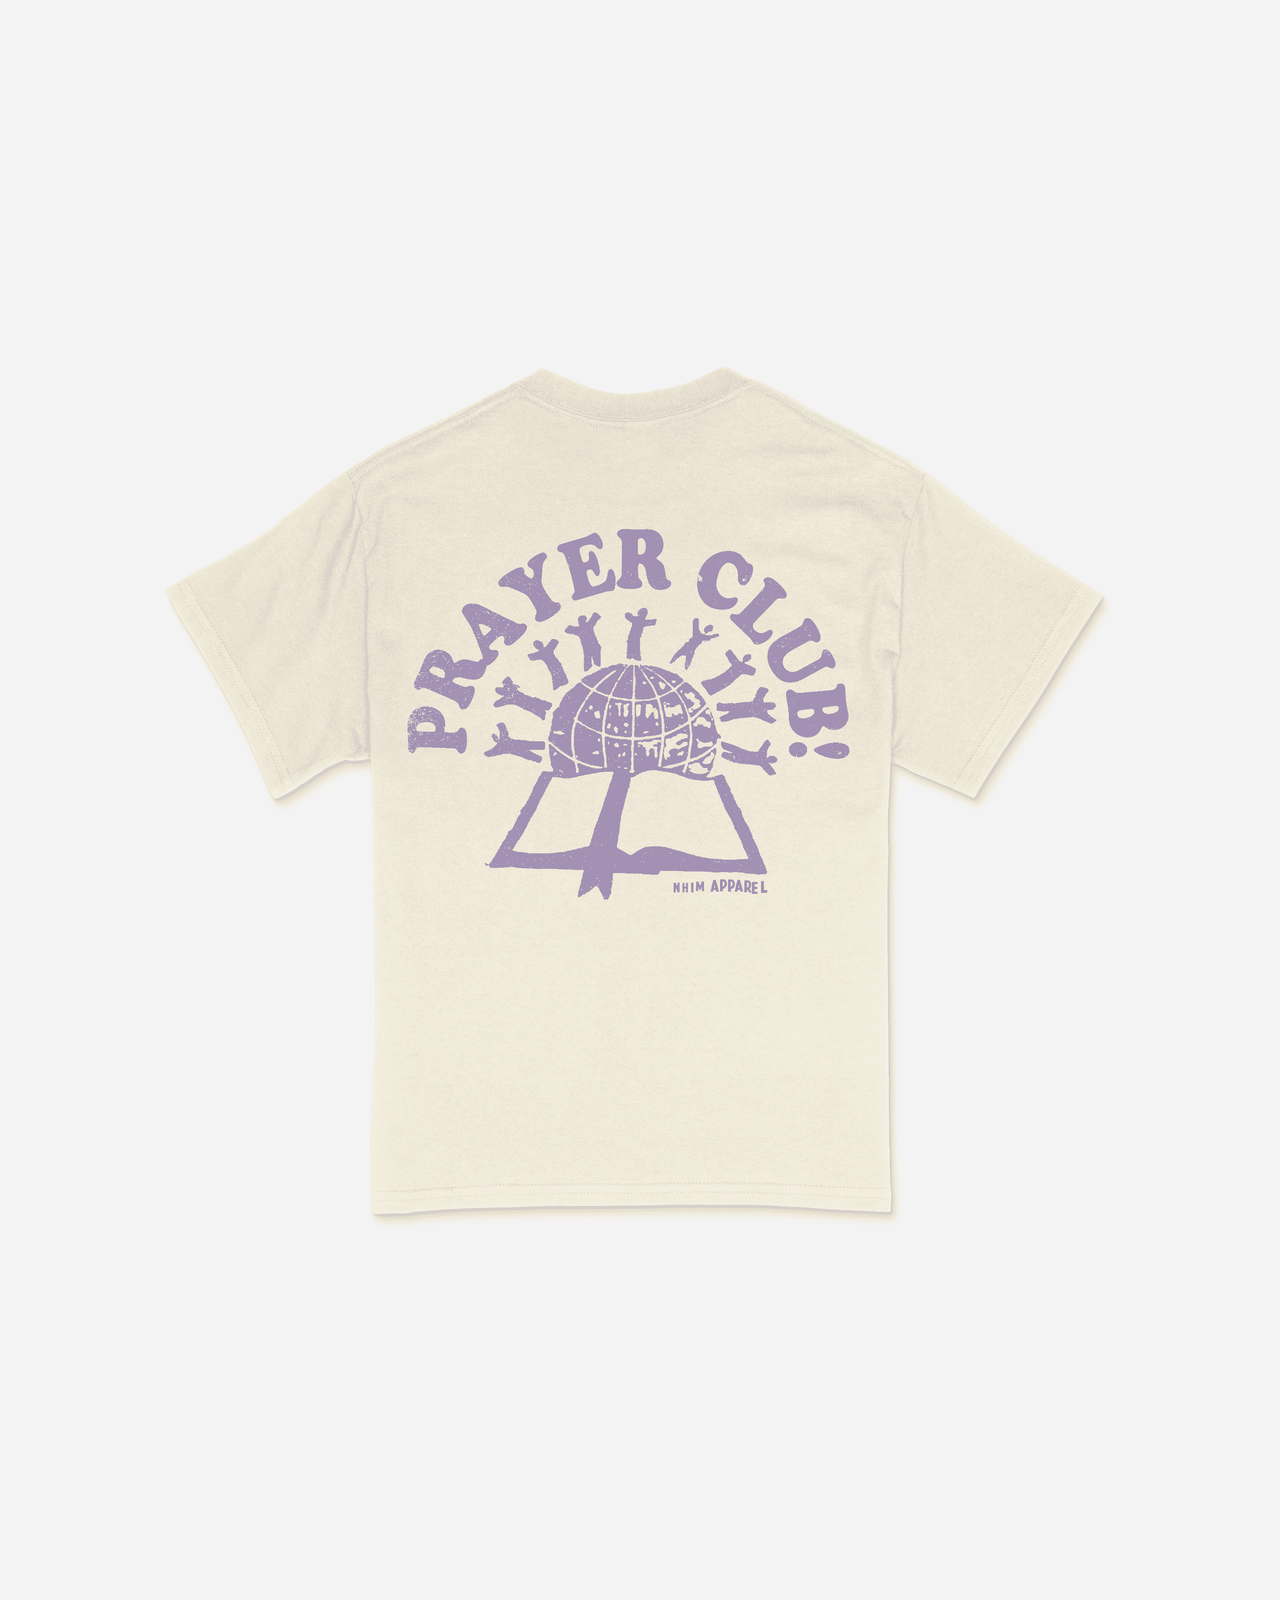 Prayer Club natural colored christian t shirt with purple graphic of people on the world with a bible made by NHIM APPAREL christian clothing brand